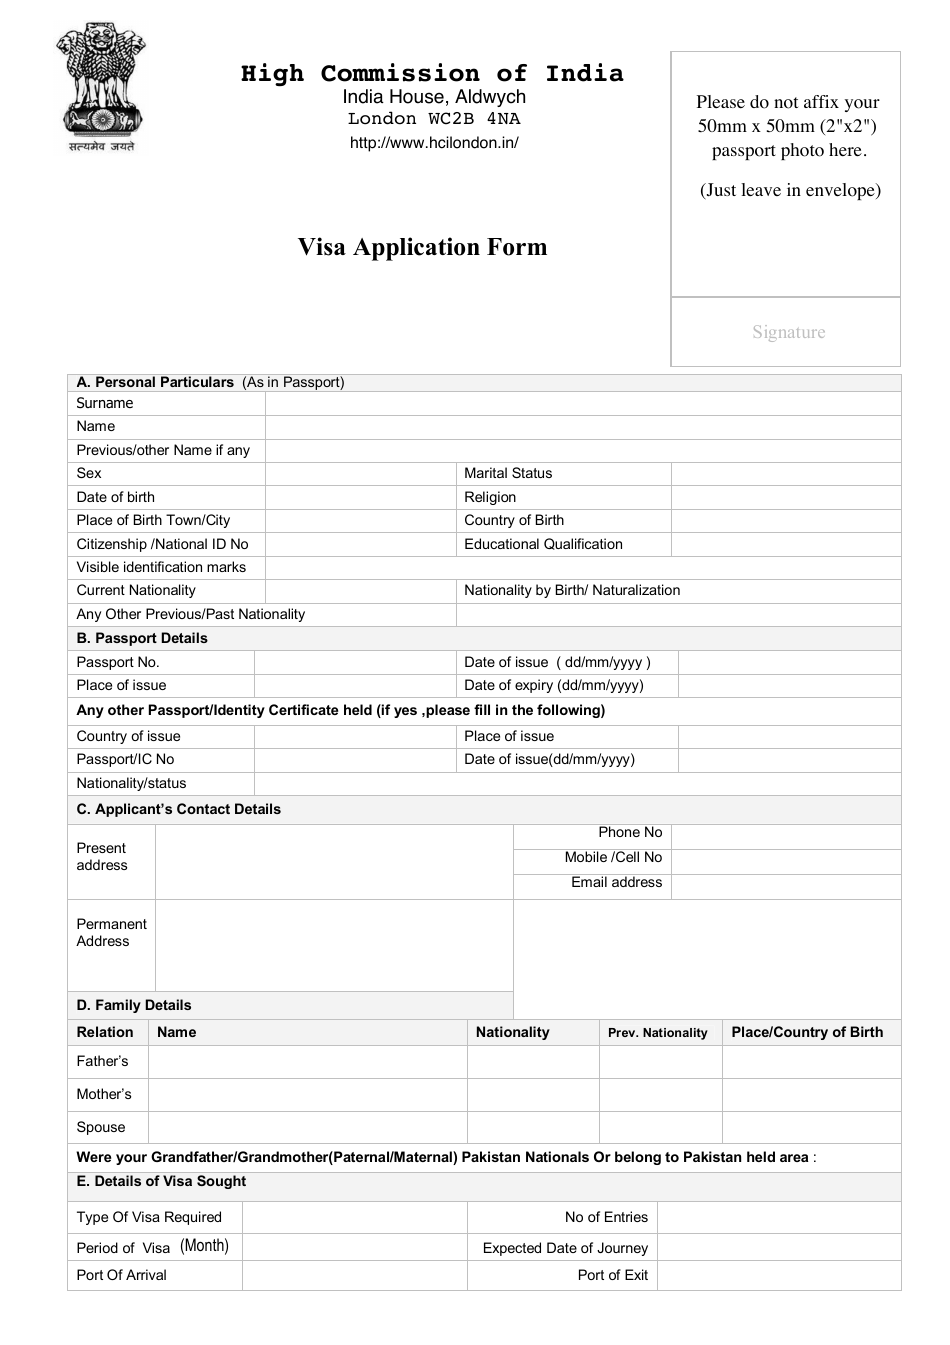 travelling docs required by b2 visitor visa